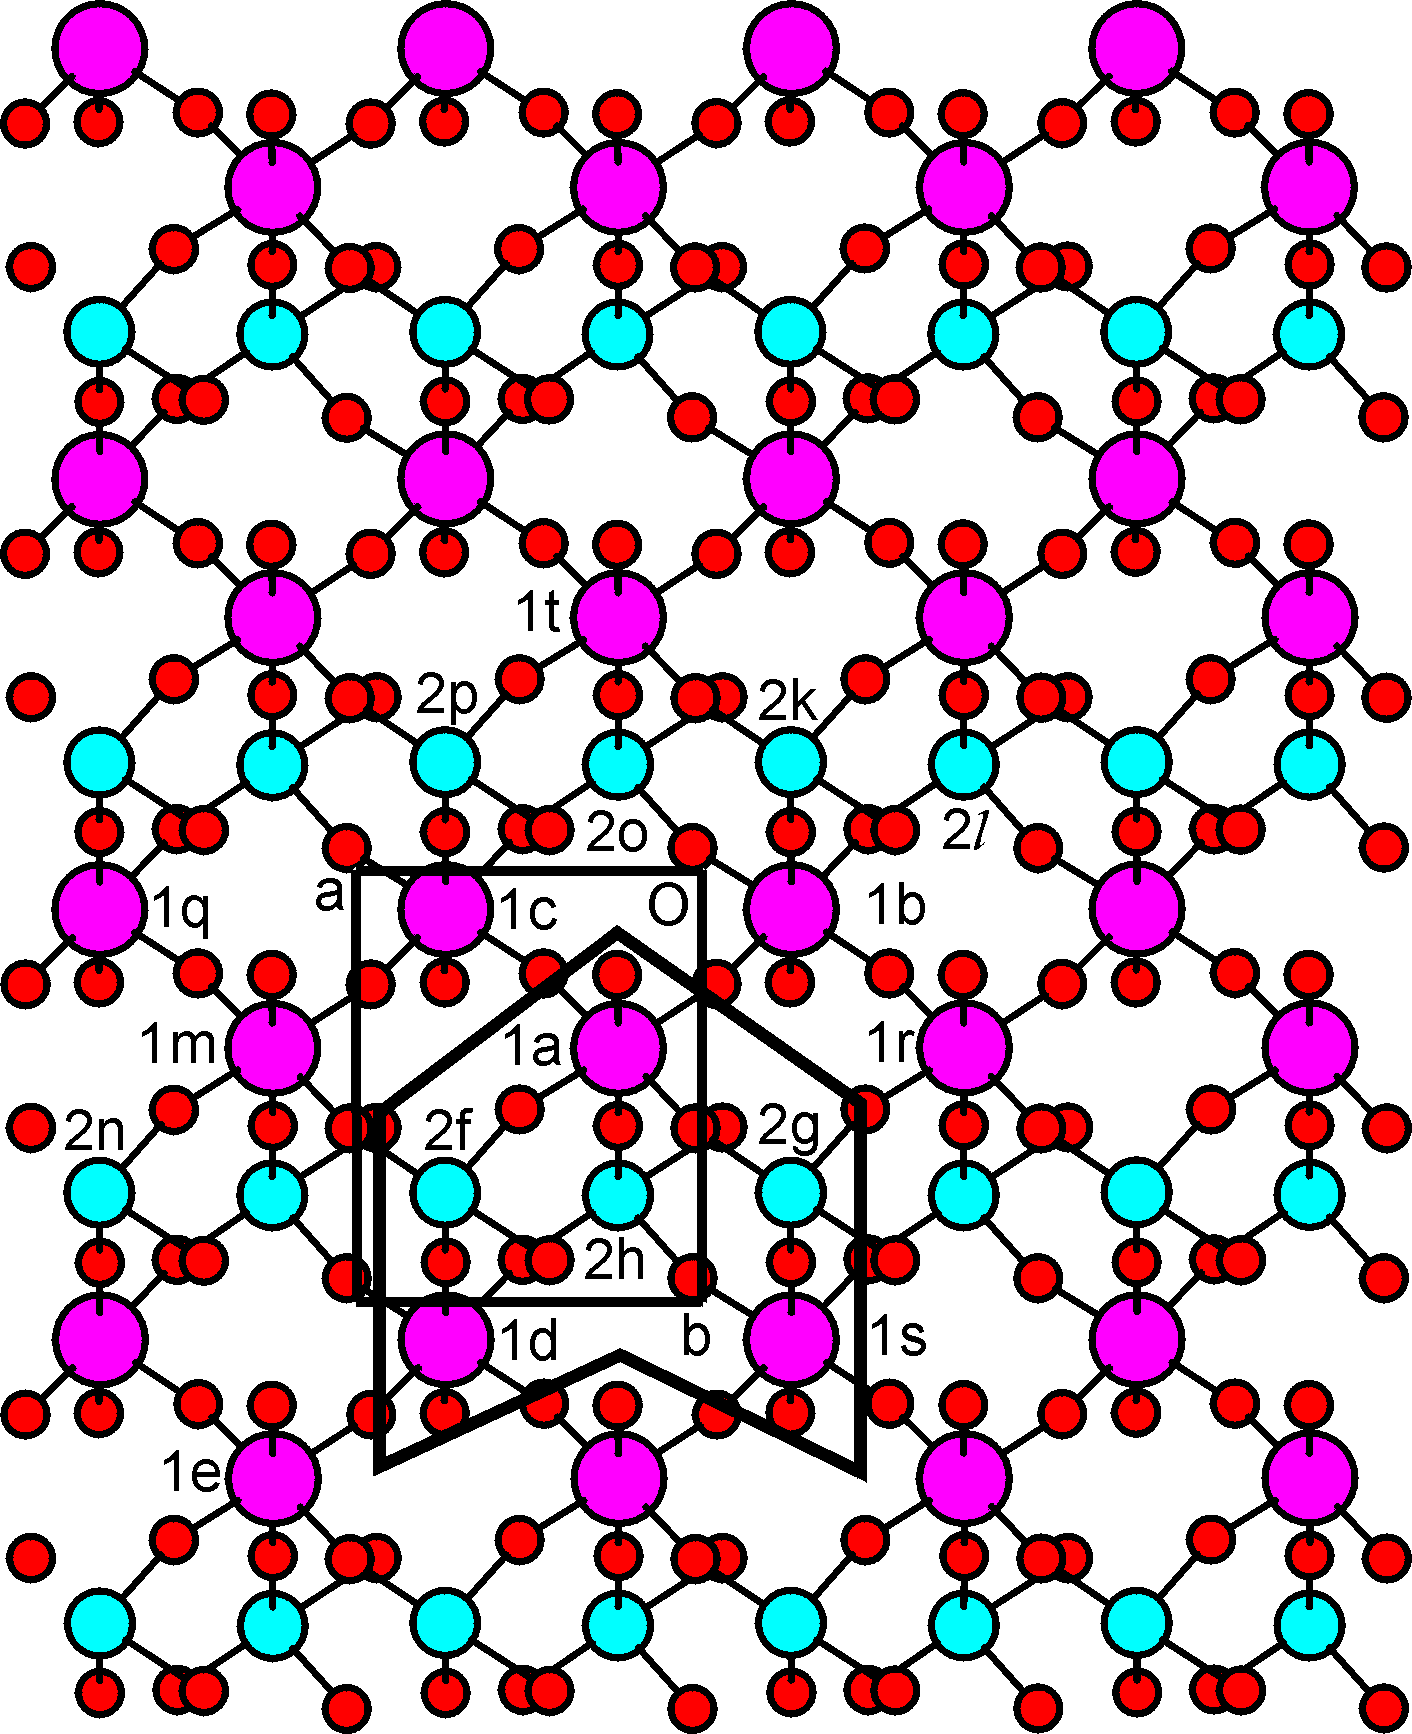 A figure of the projection of one layer of WO3 onto the (a, b) plane, showing the individual atoms